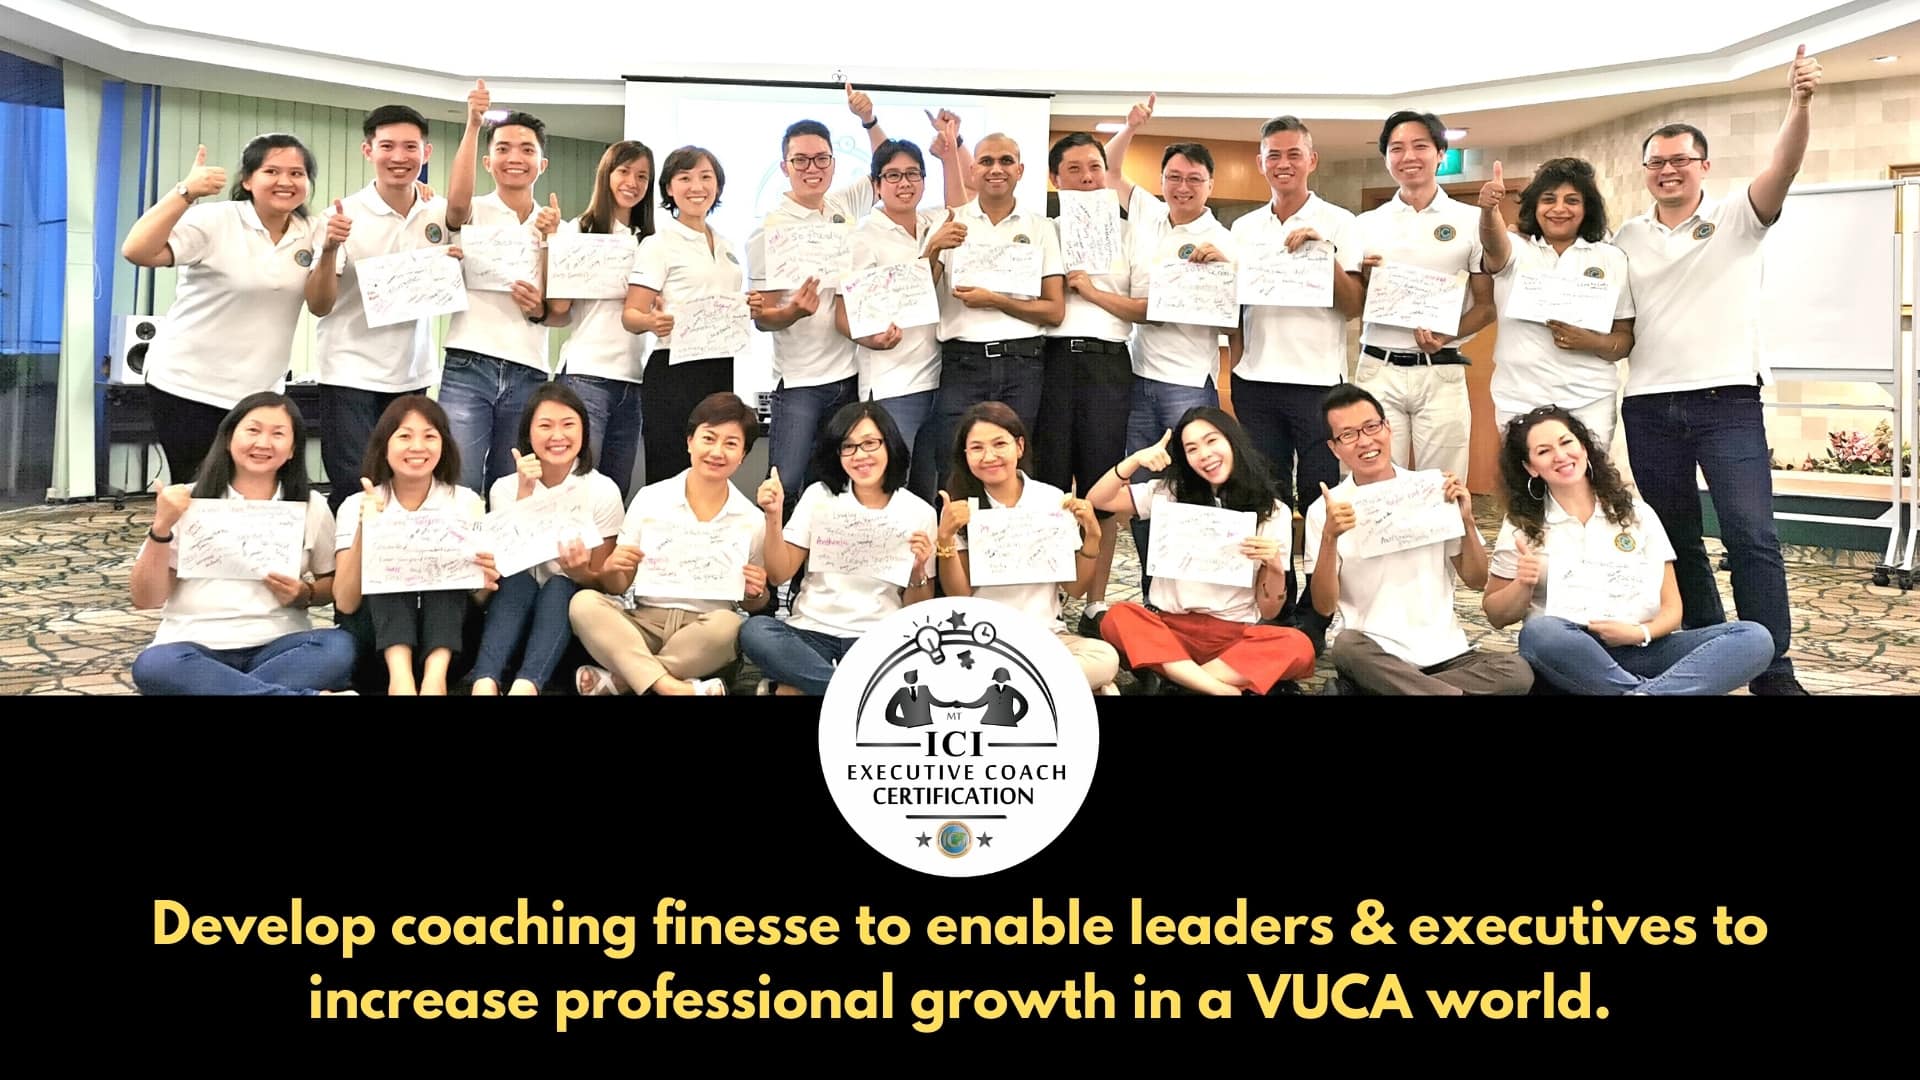 high leverage executive coaching certification for coaches leaders managers executives in vuca world